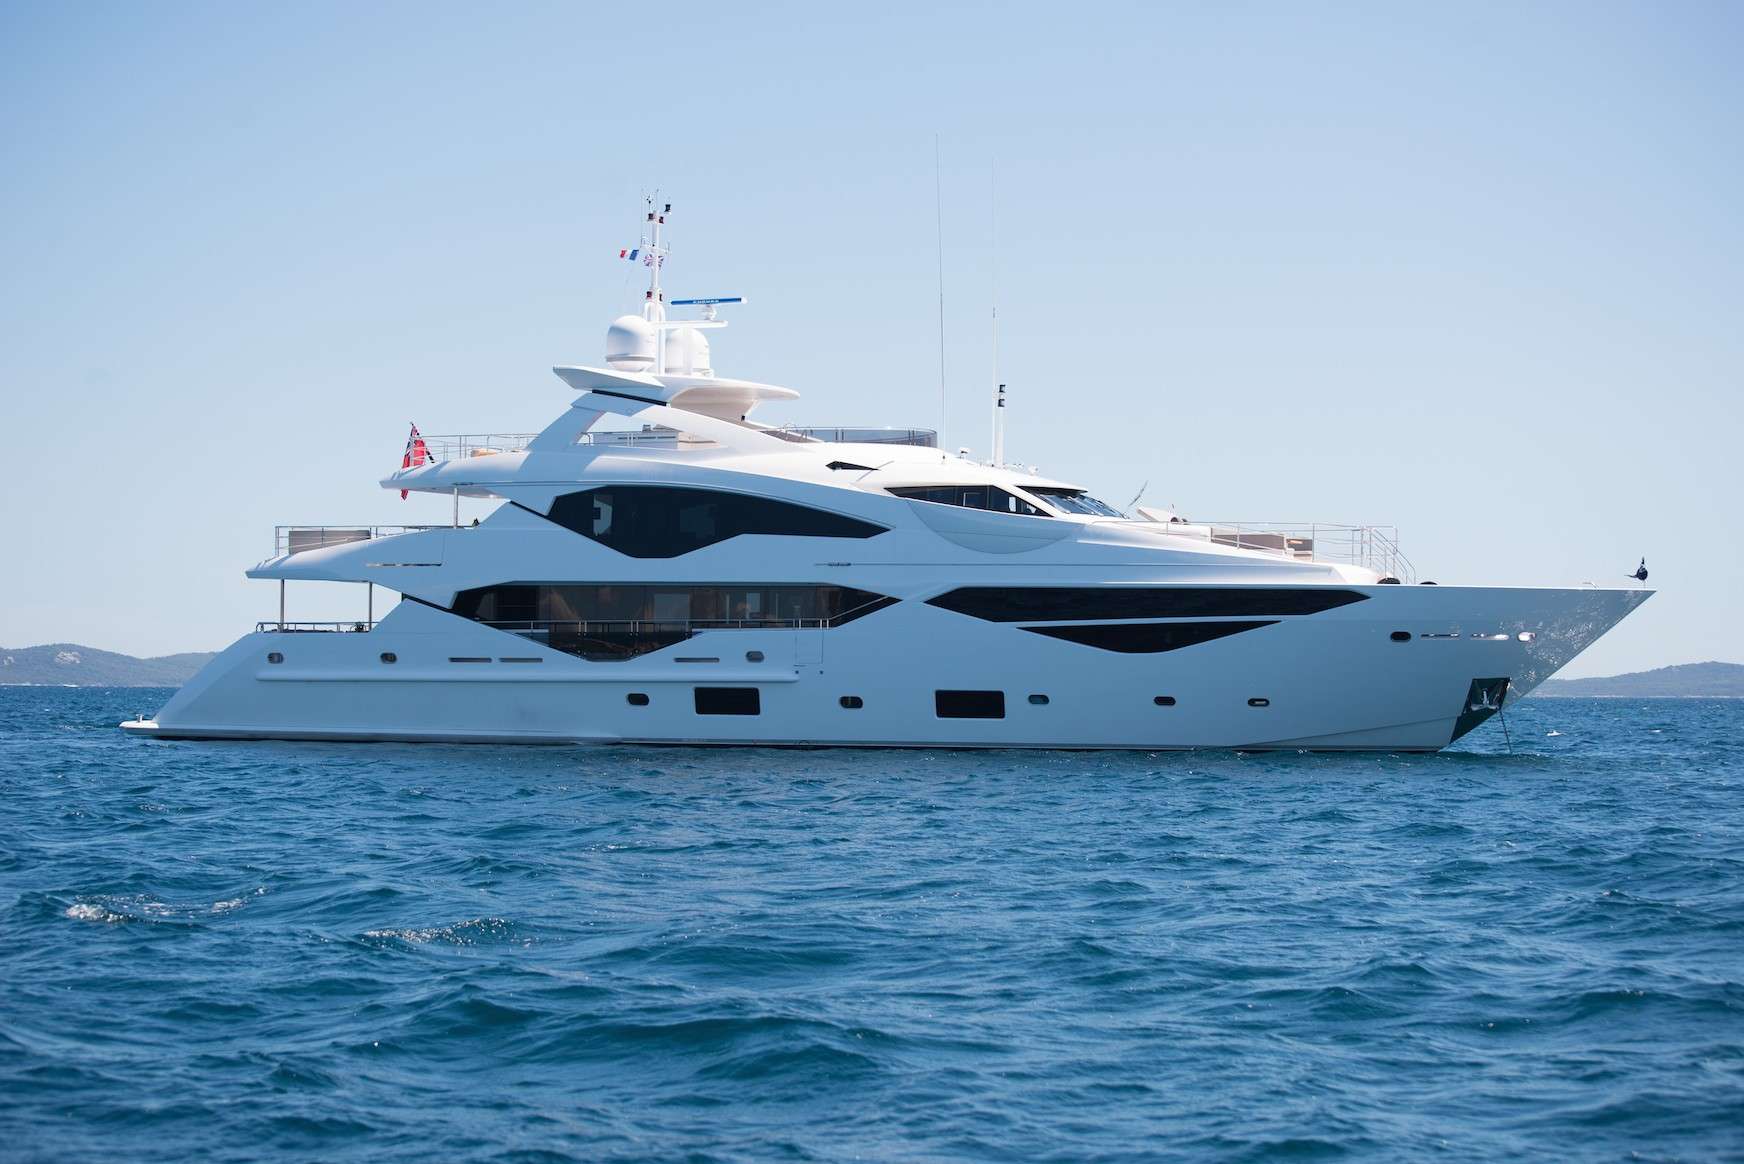 E-MOTION - Yacht Charter Cannes & Boat hire in Fr. Riviera, Corsica & Sardinia 1